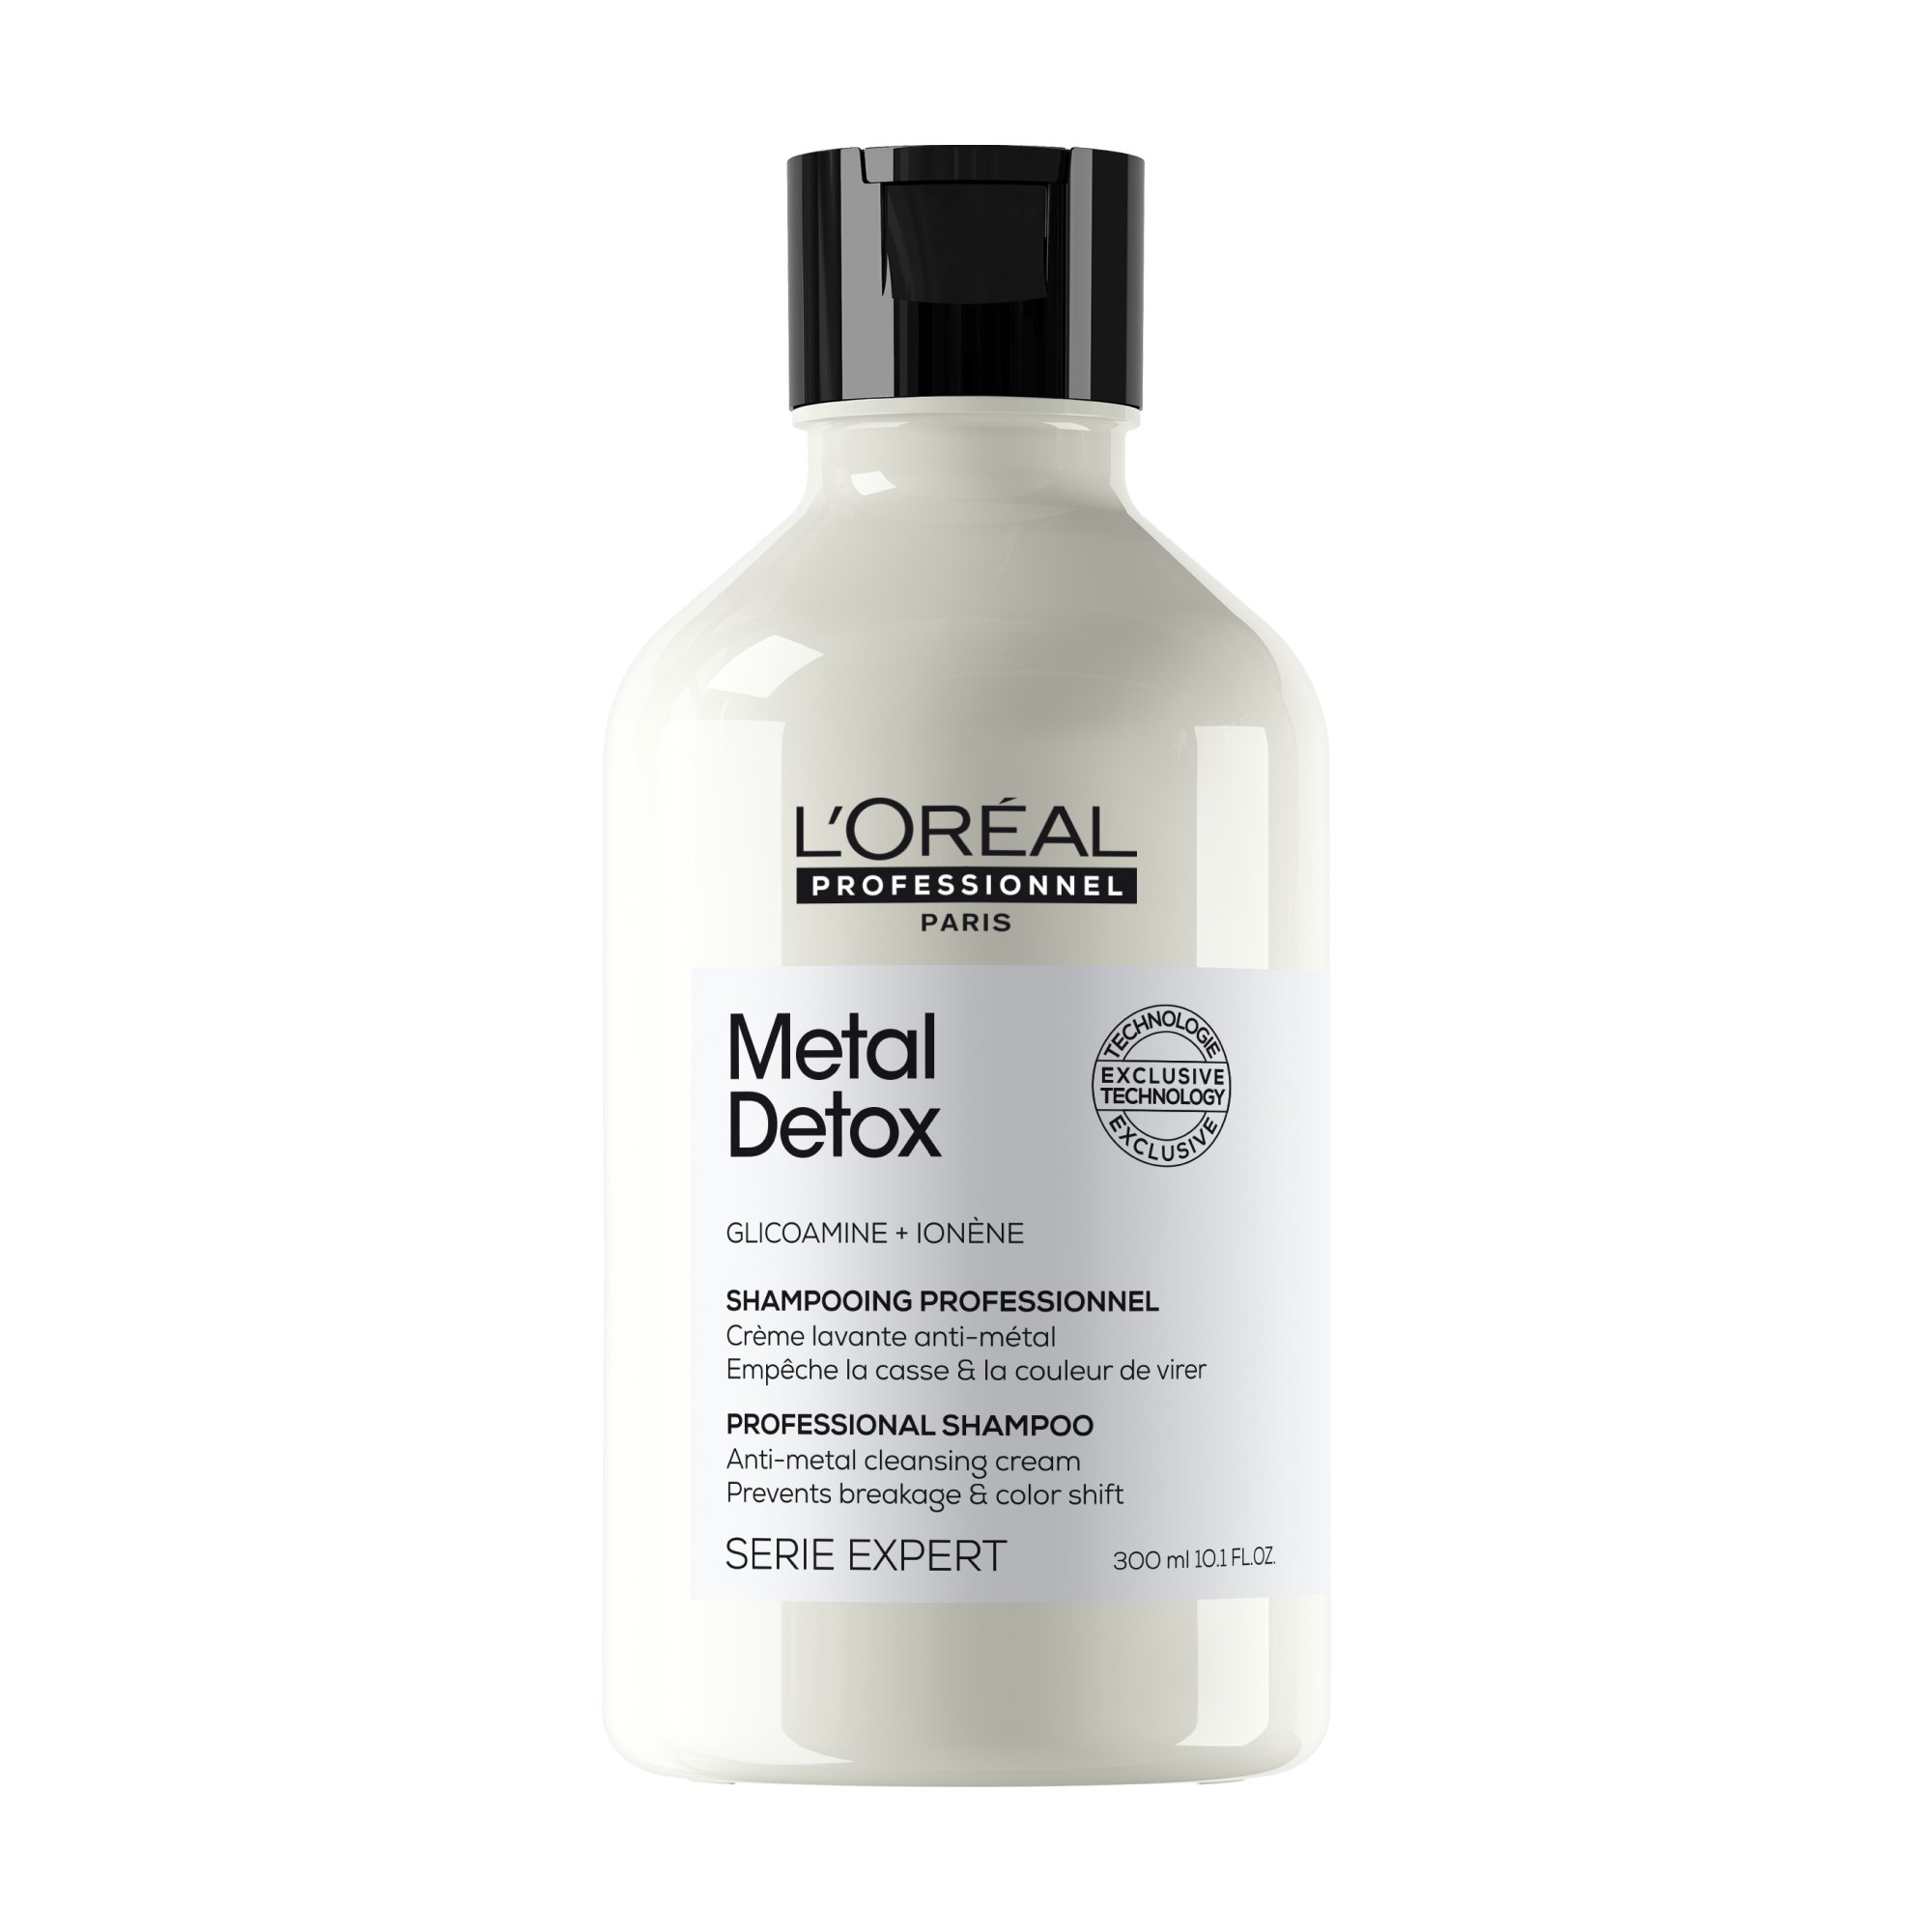 Loreal pro metal deox cream picture